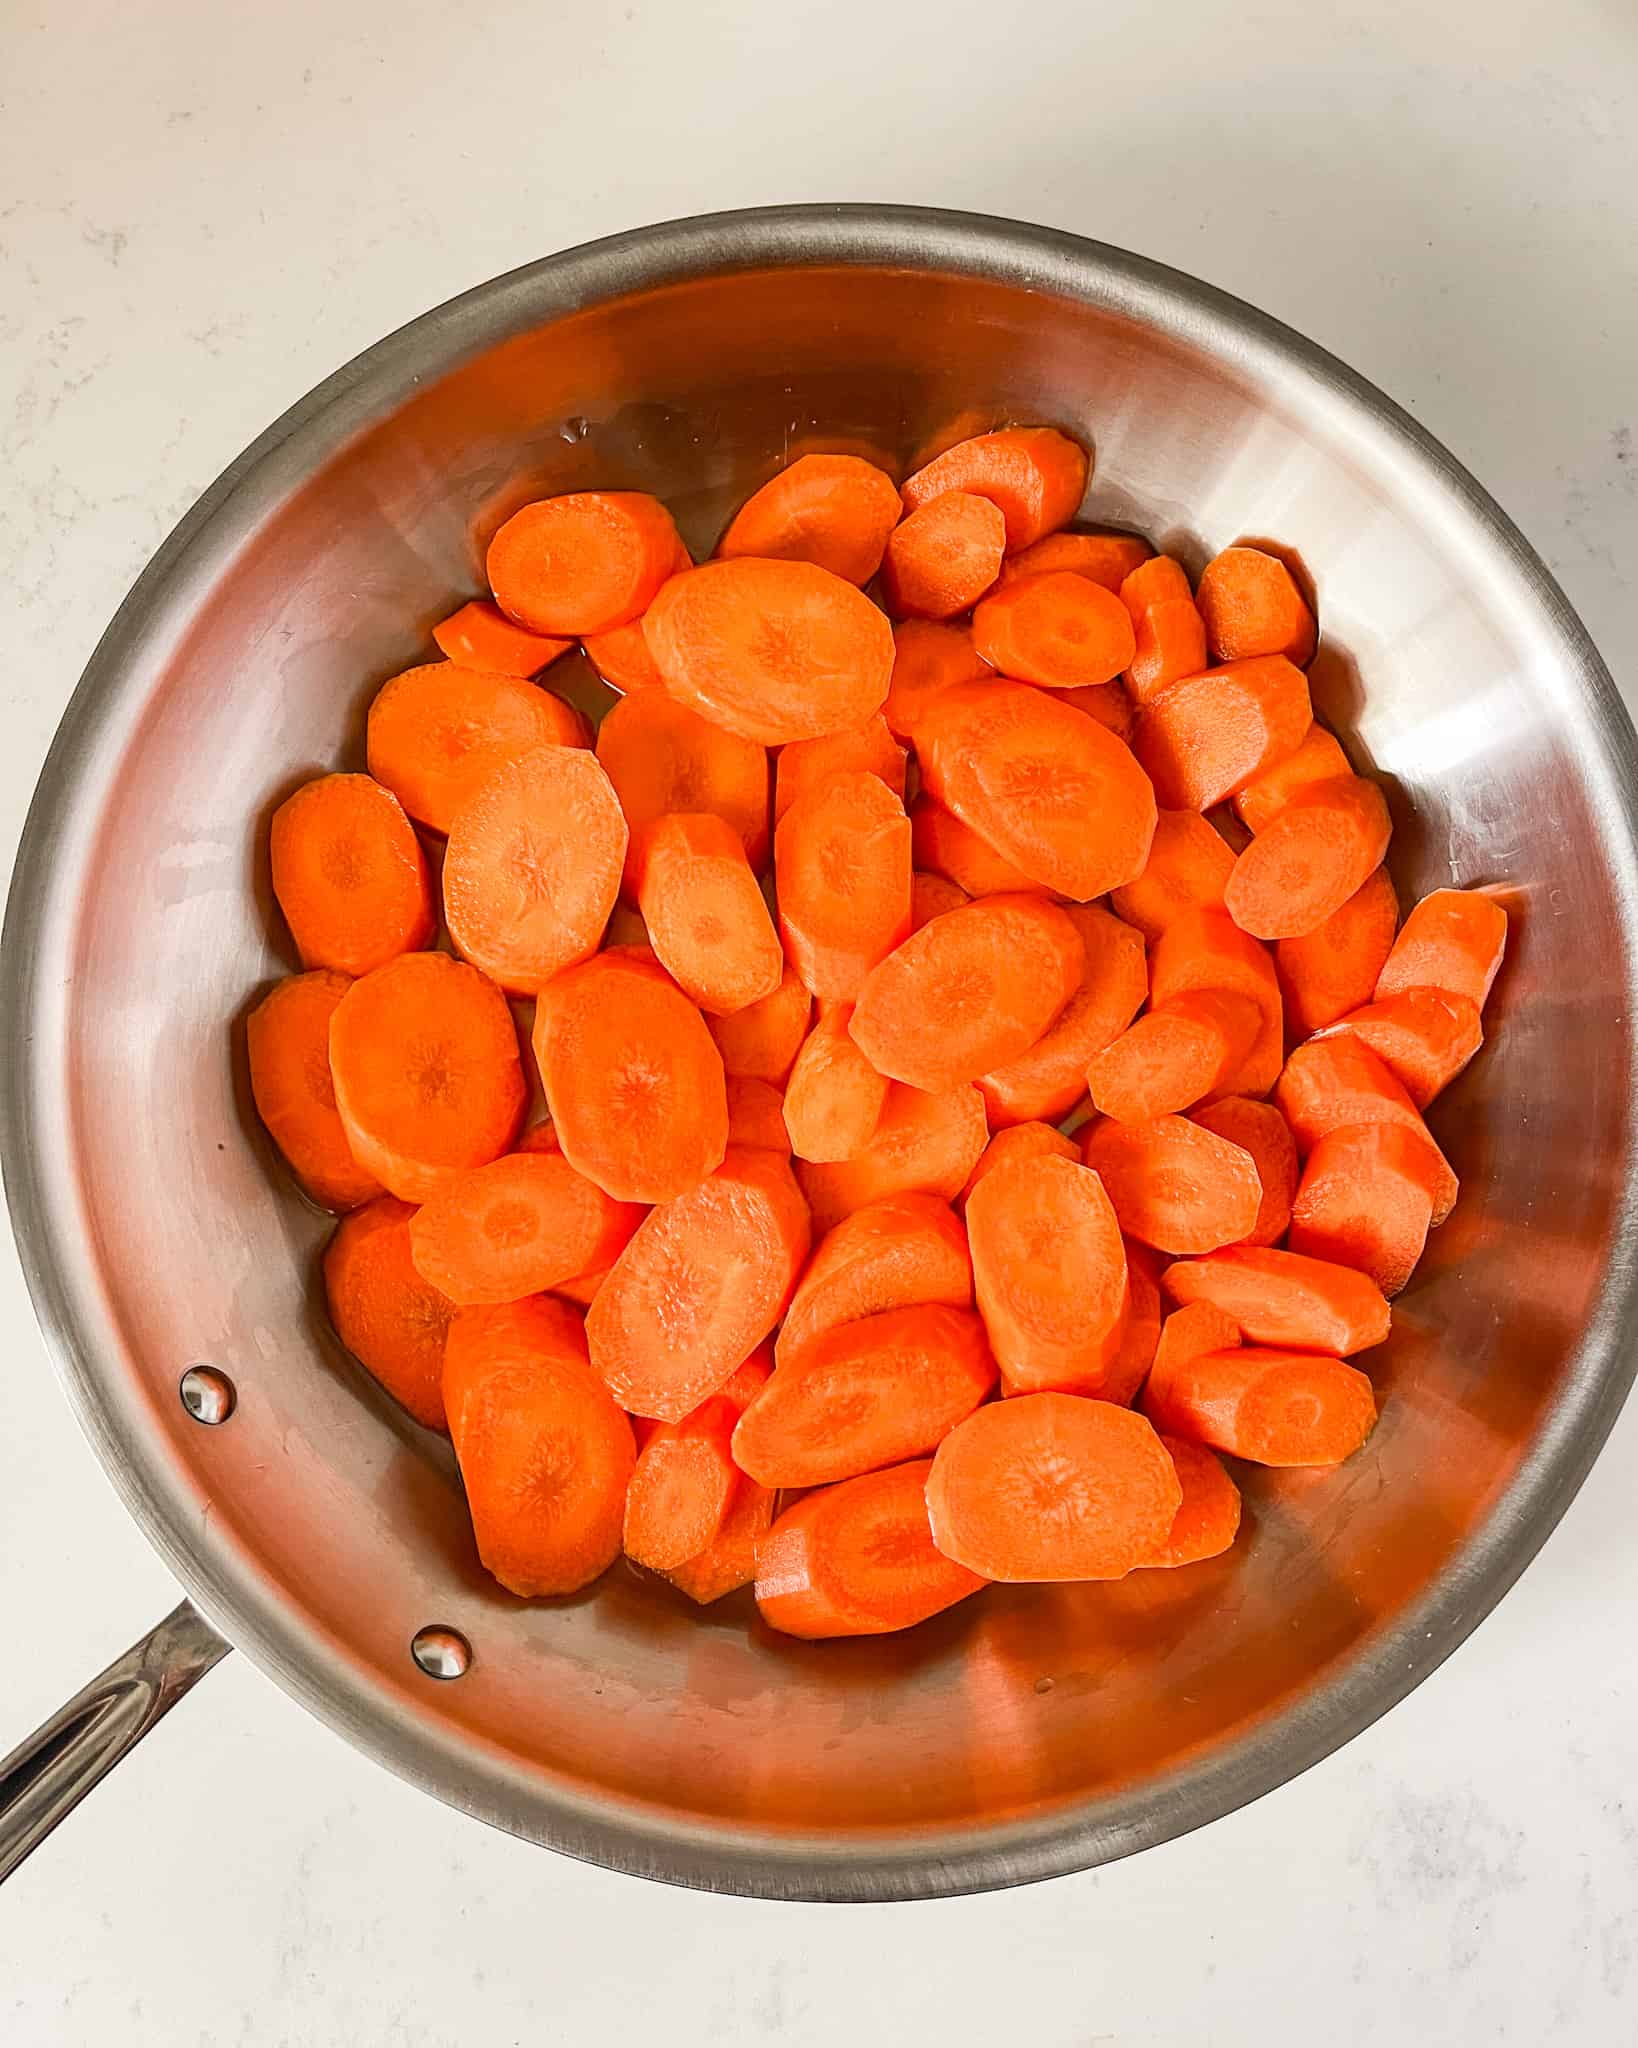 Sliced carrots in a skillet with water.